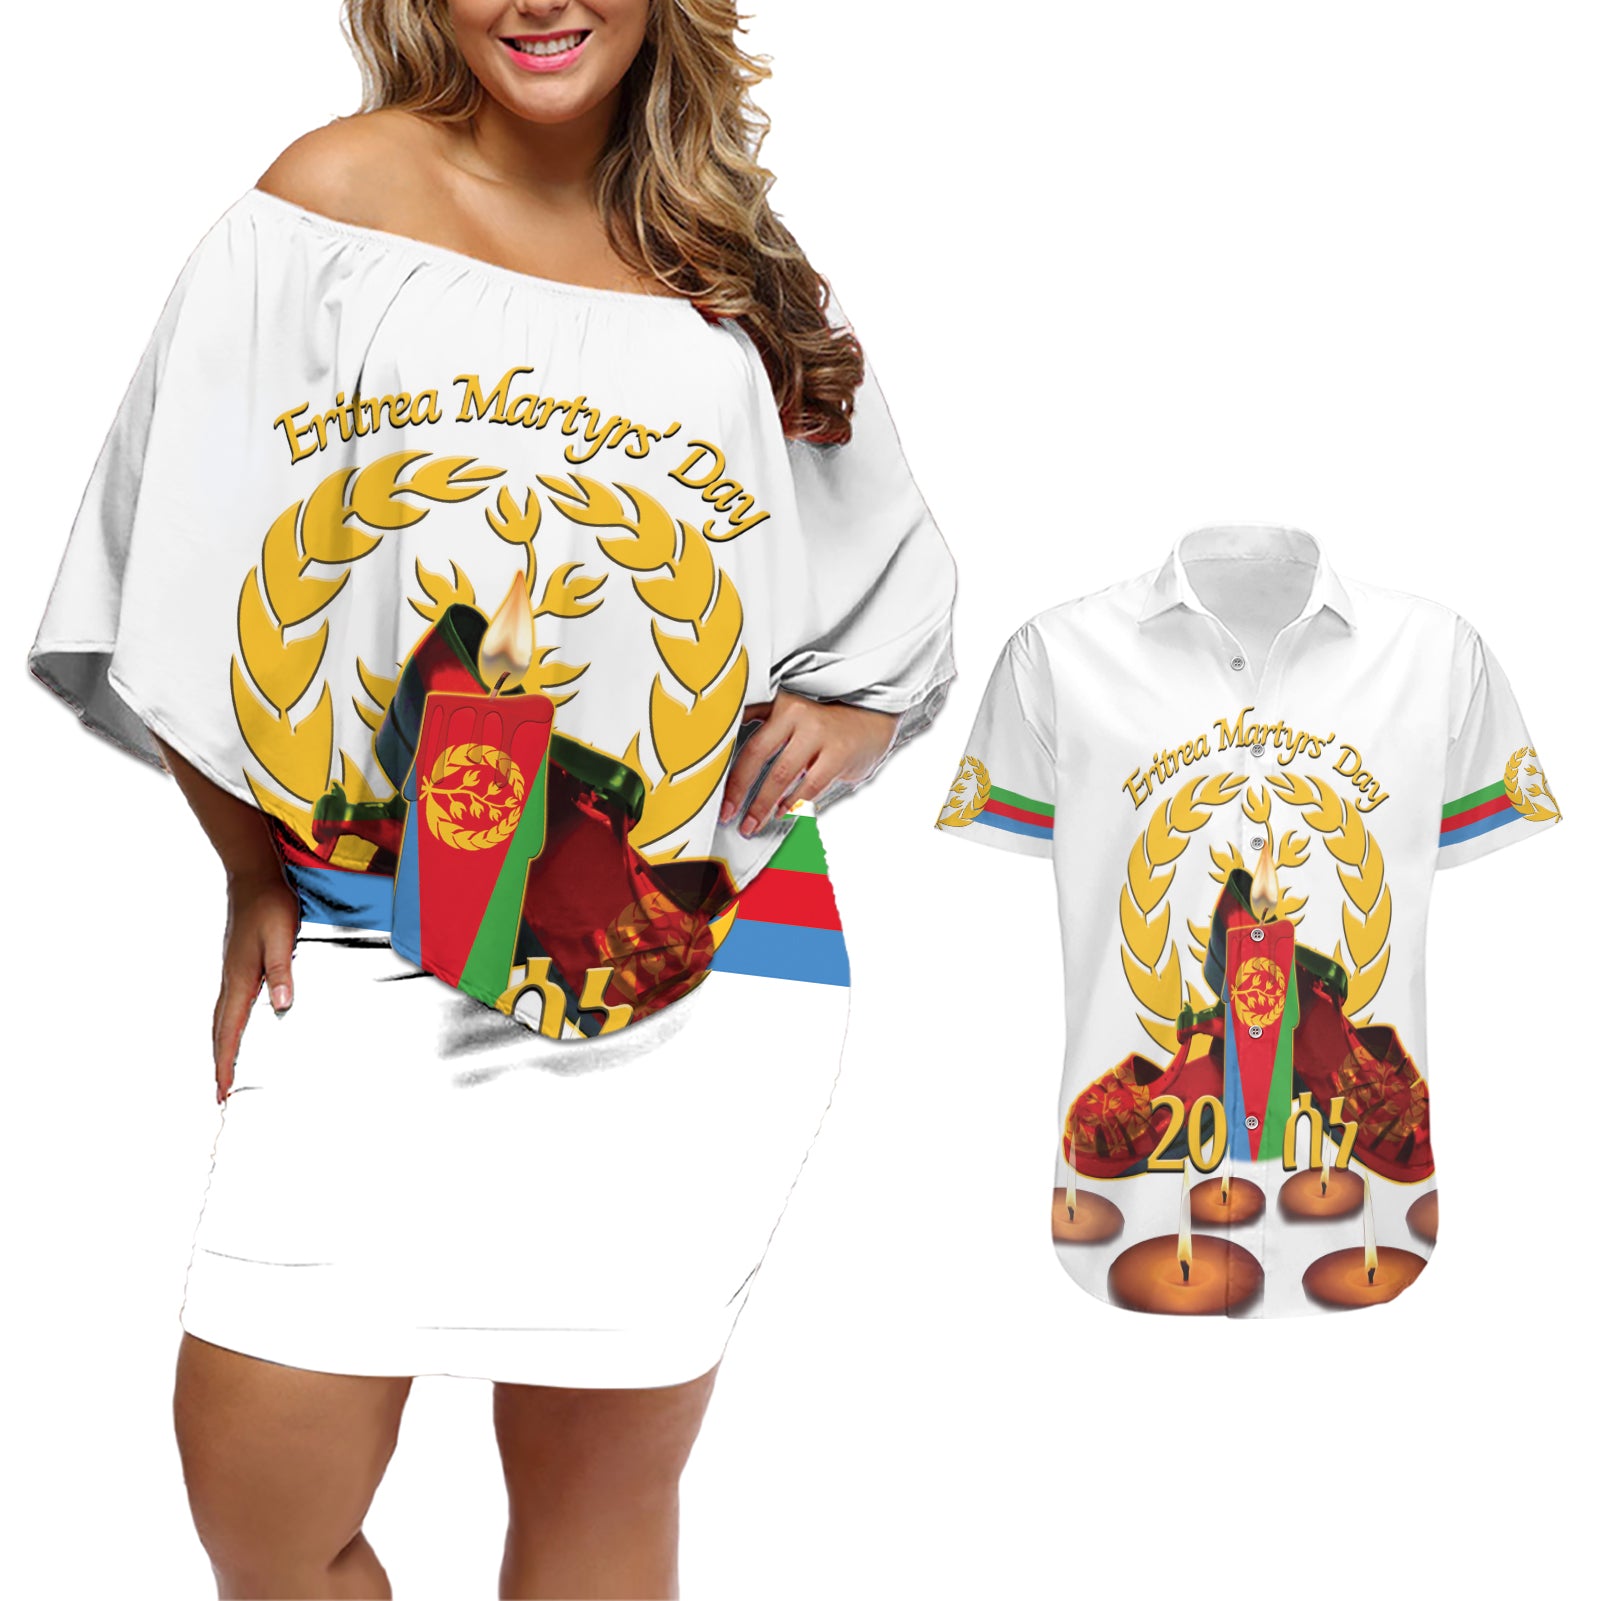 Custom Eritrea Martyrs' Day Couples Matching Off Shoulder Short Dress and Hawaiian Shirt 20 June Shida Shoes With Candles - White